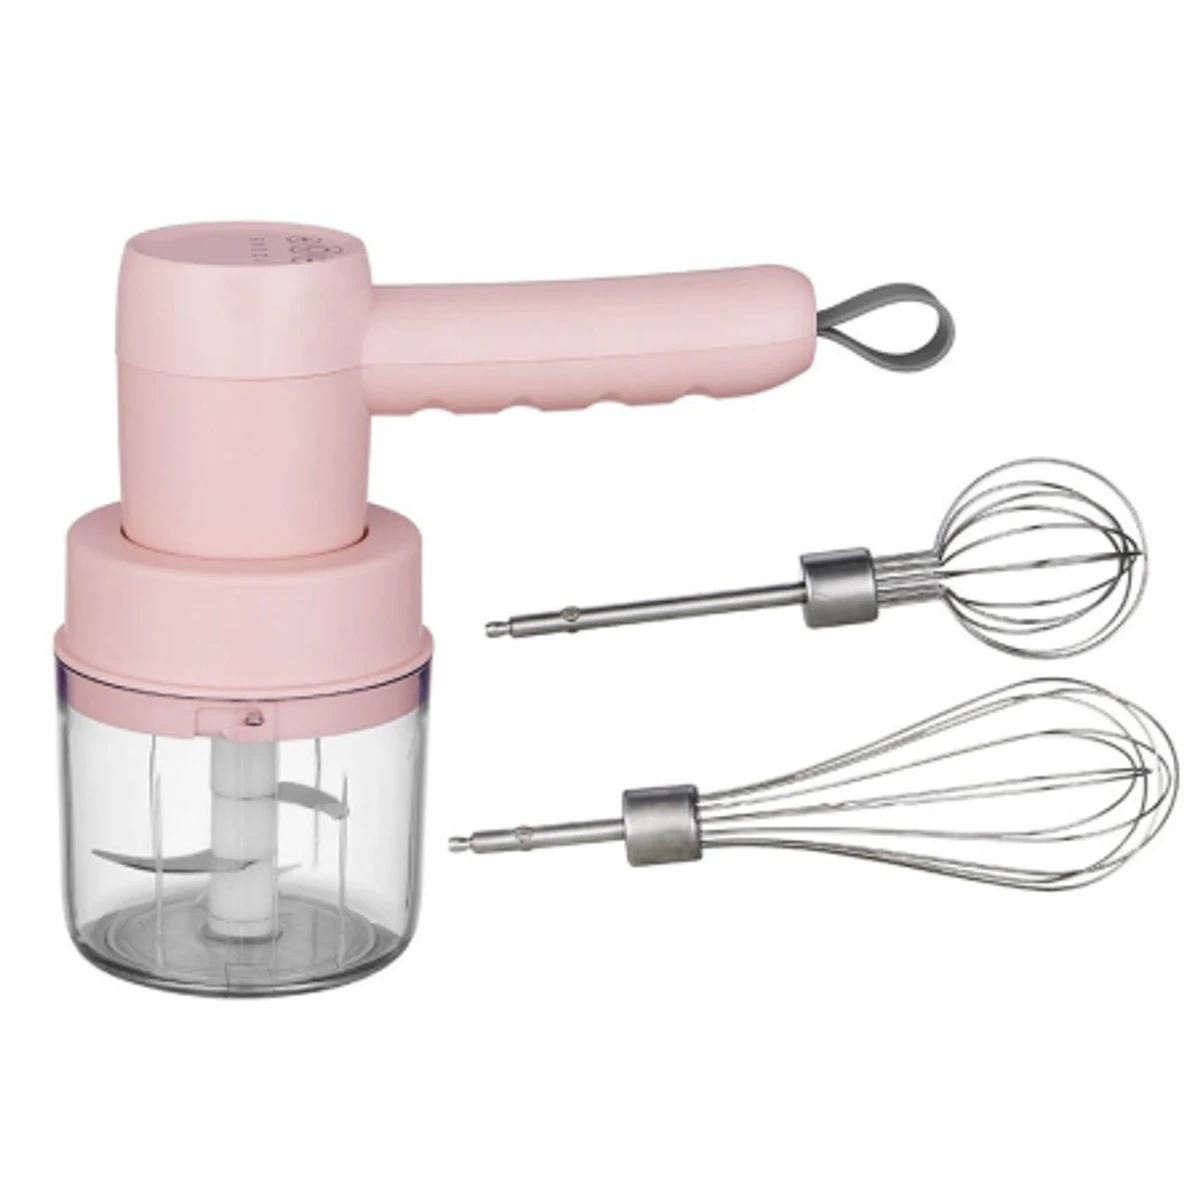 3-In-1 Wireless Portable Electric Mixer and Chopper